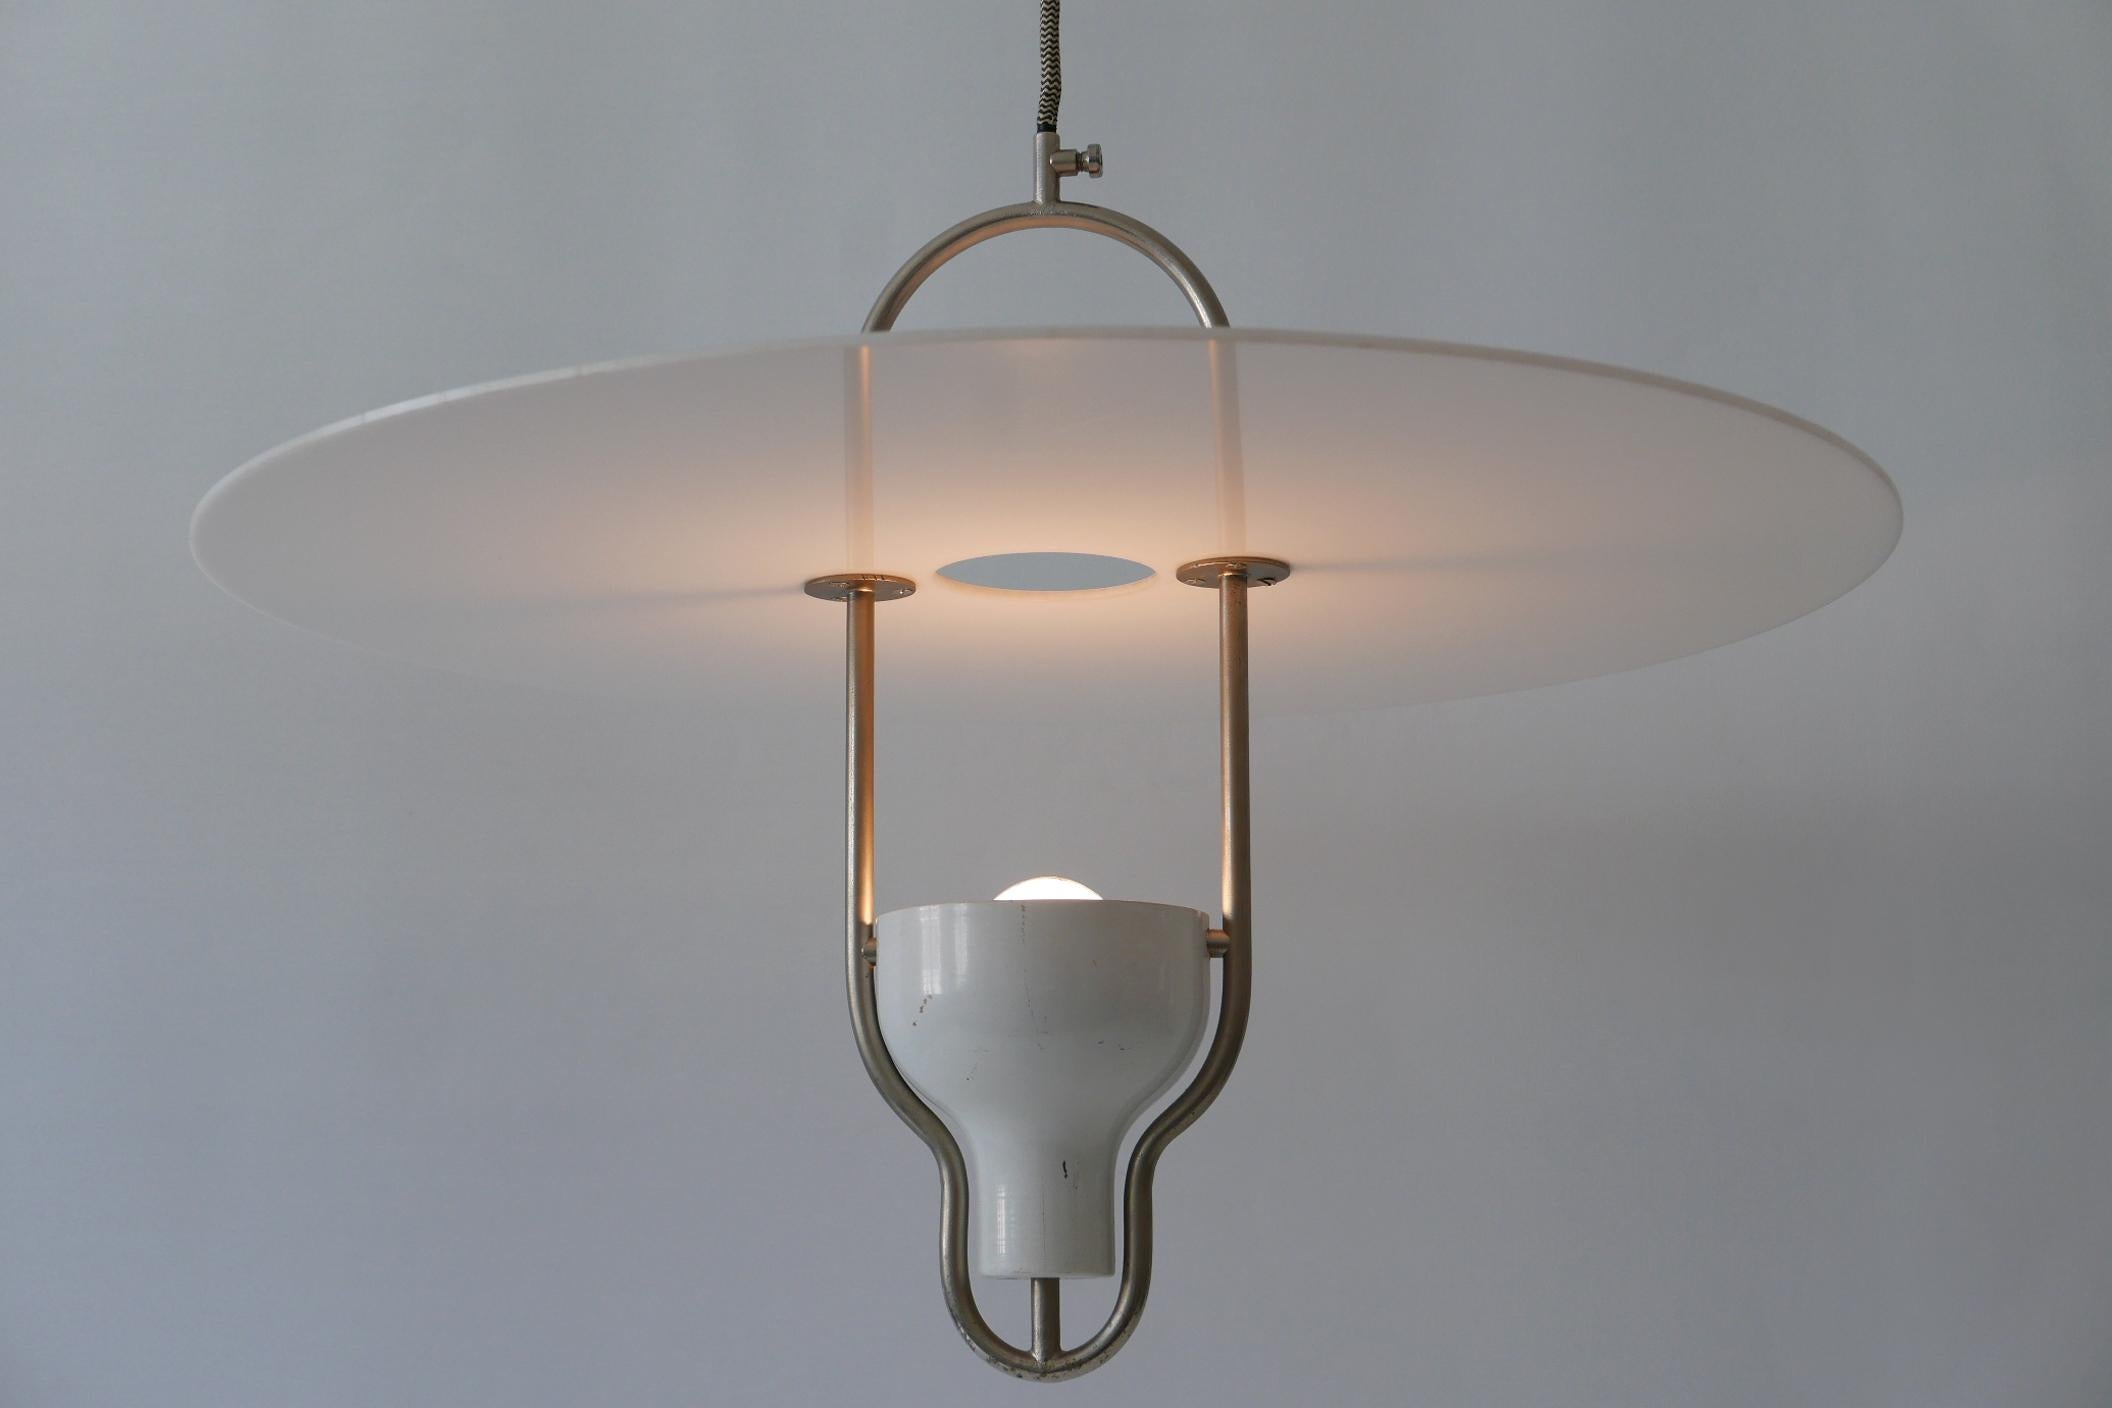 Exceptional Mid-Century Modern Ufo Pendant Lamp, Italy, 1960s For Sale 11